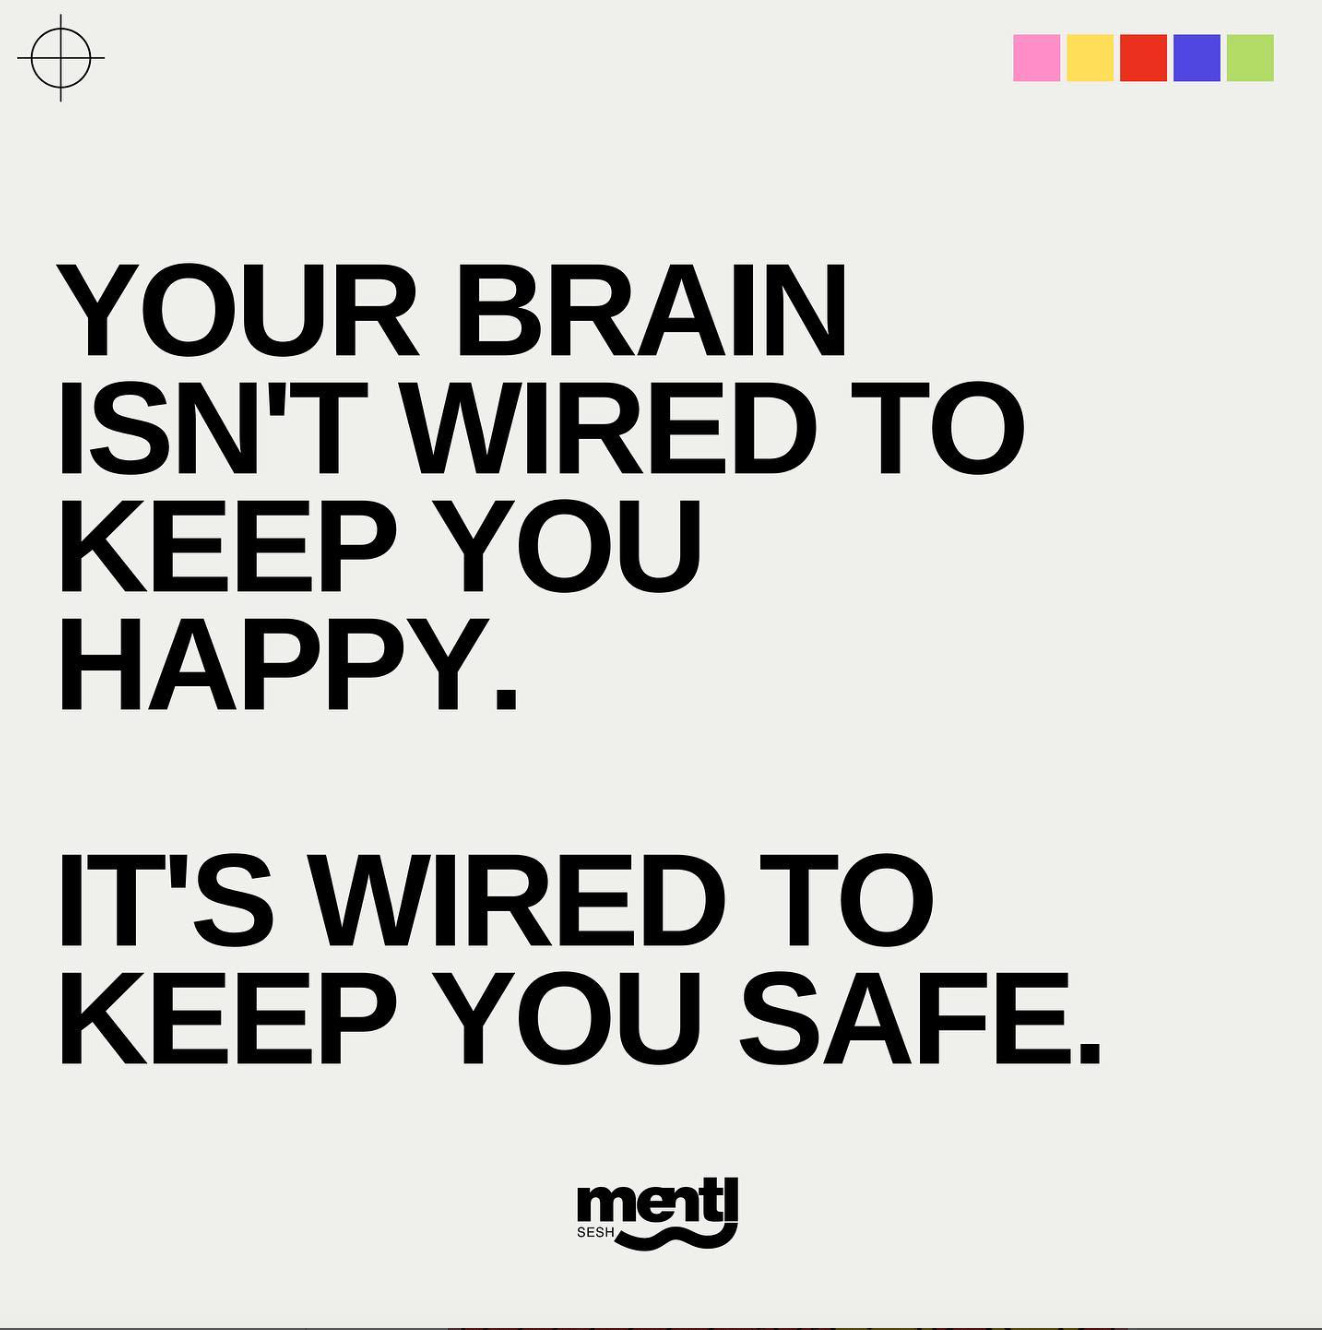 an Instagram post from Mentl Sesh that reads, "Your brain isn't wired to keep you happy. It's wired to keep you safe."